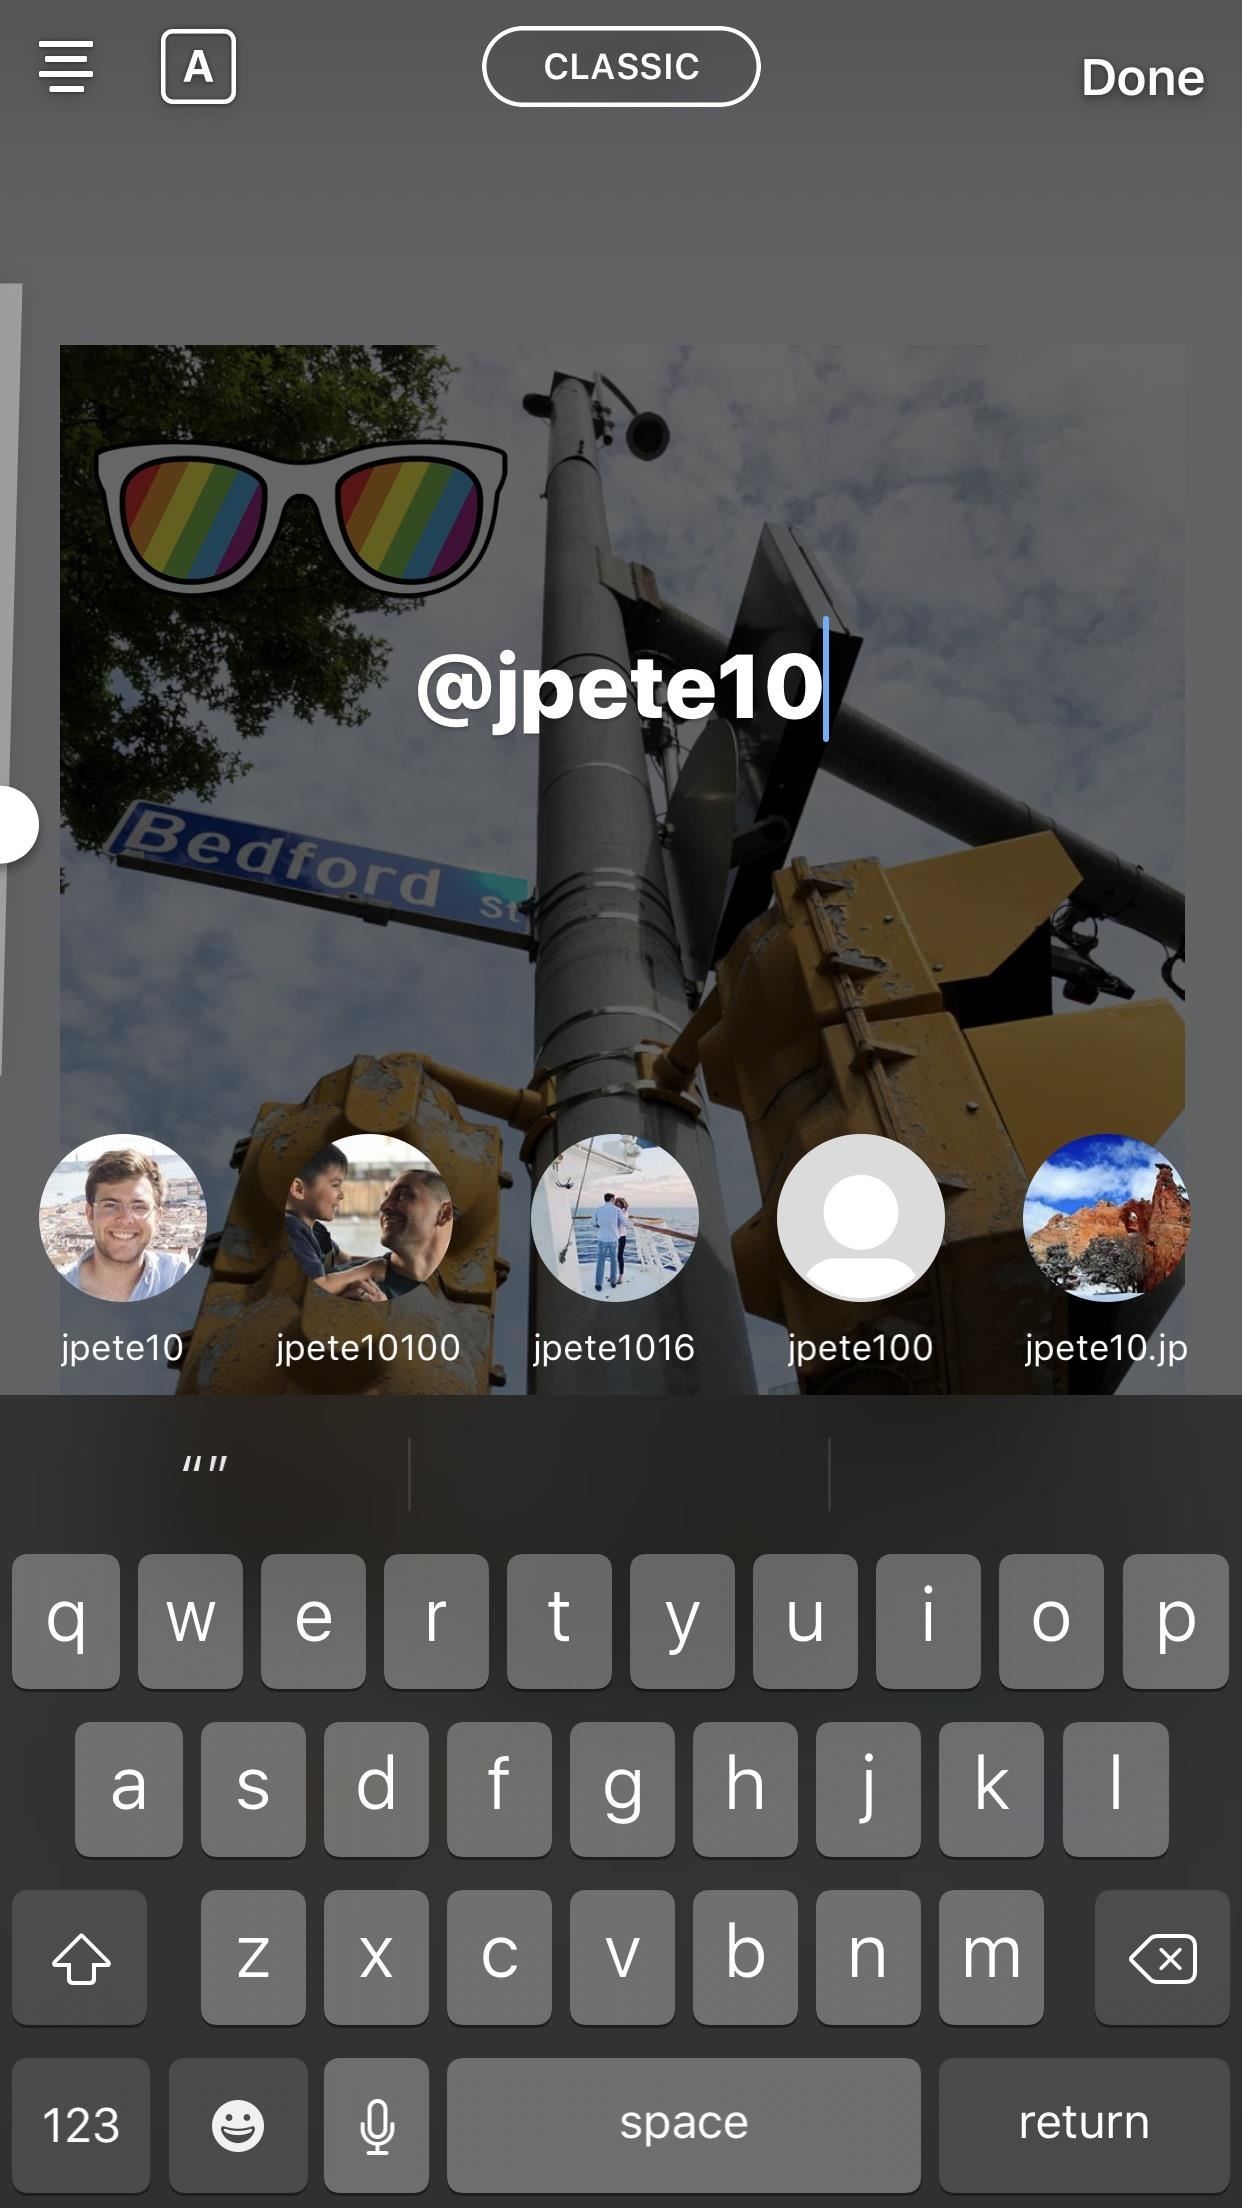 How to Share Your Friends' Instagram Stories in Your Own Story